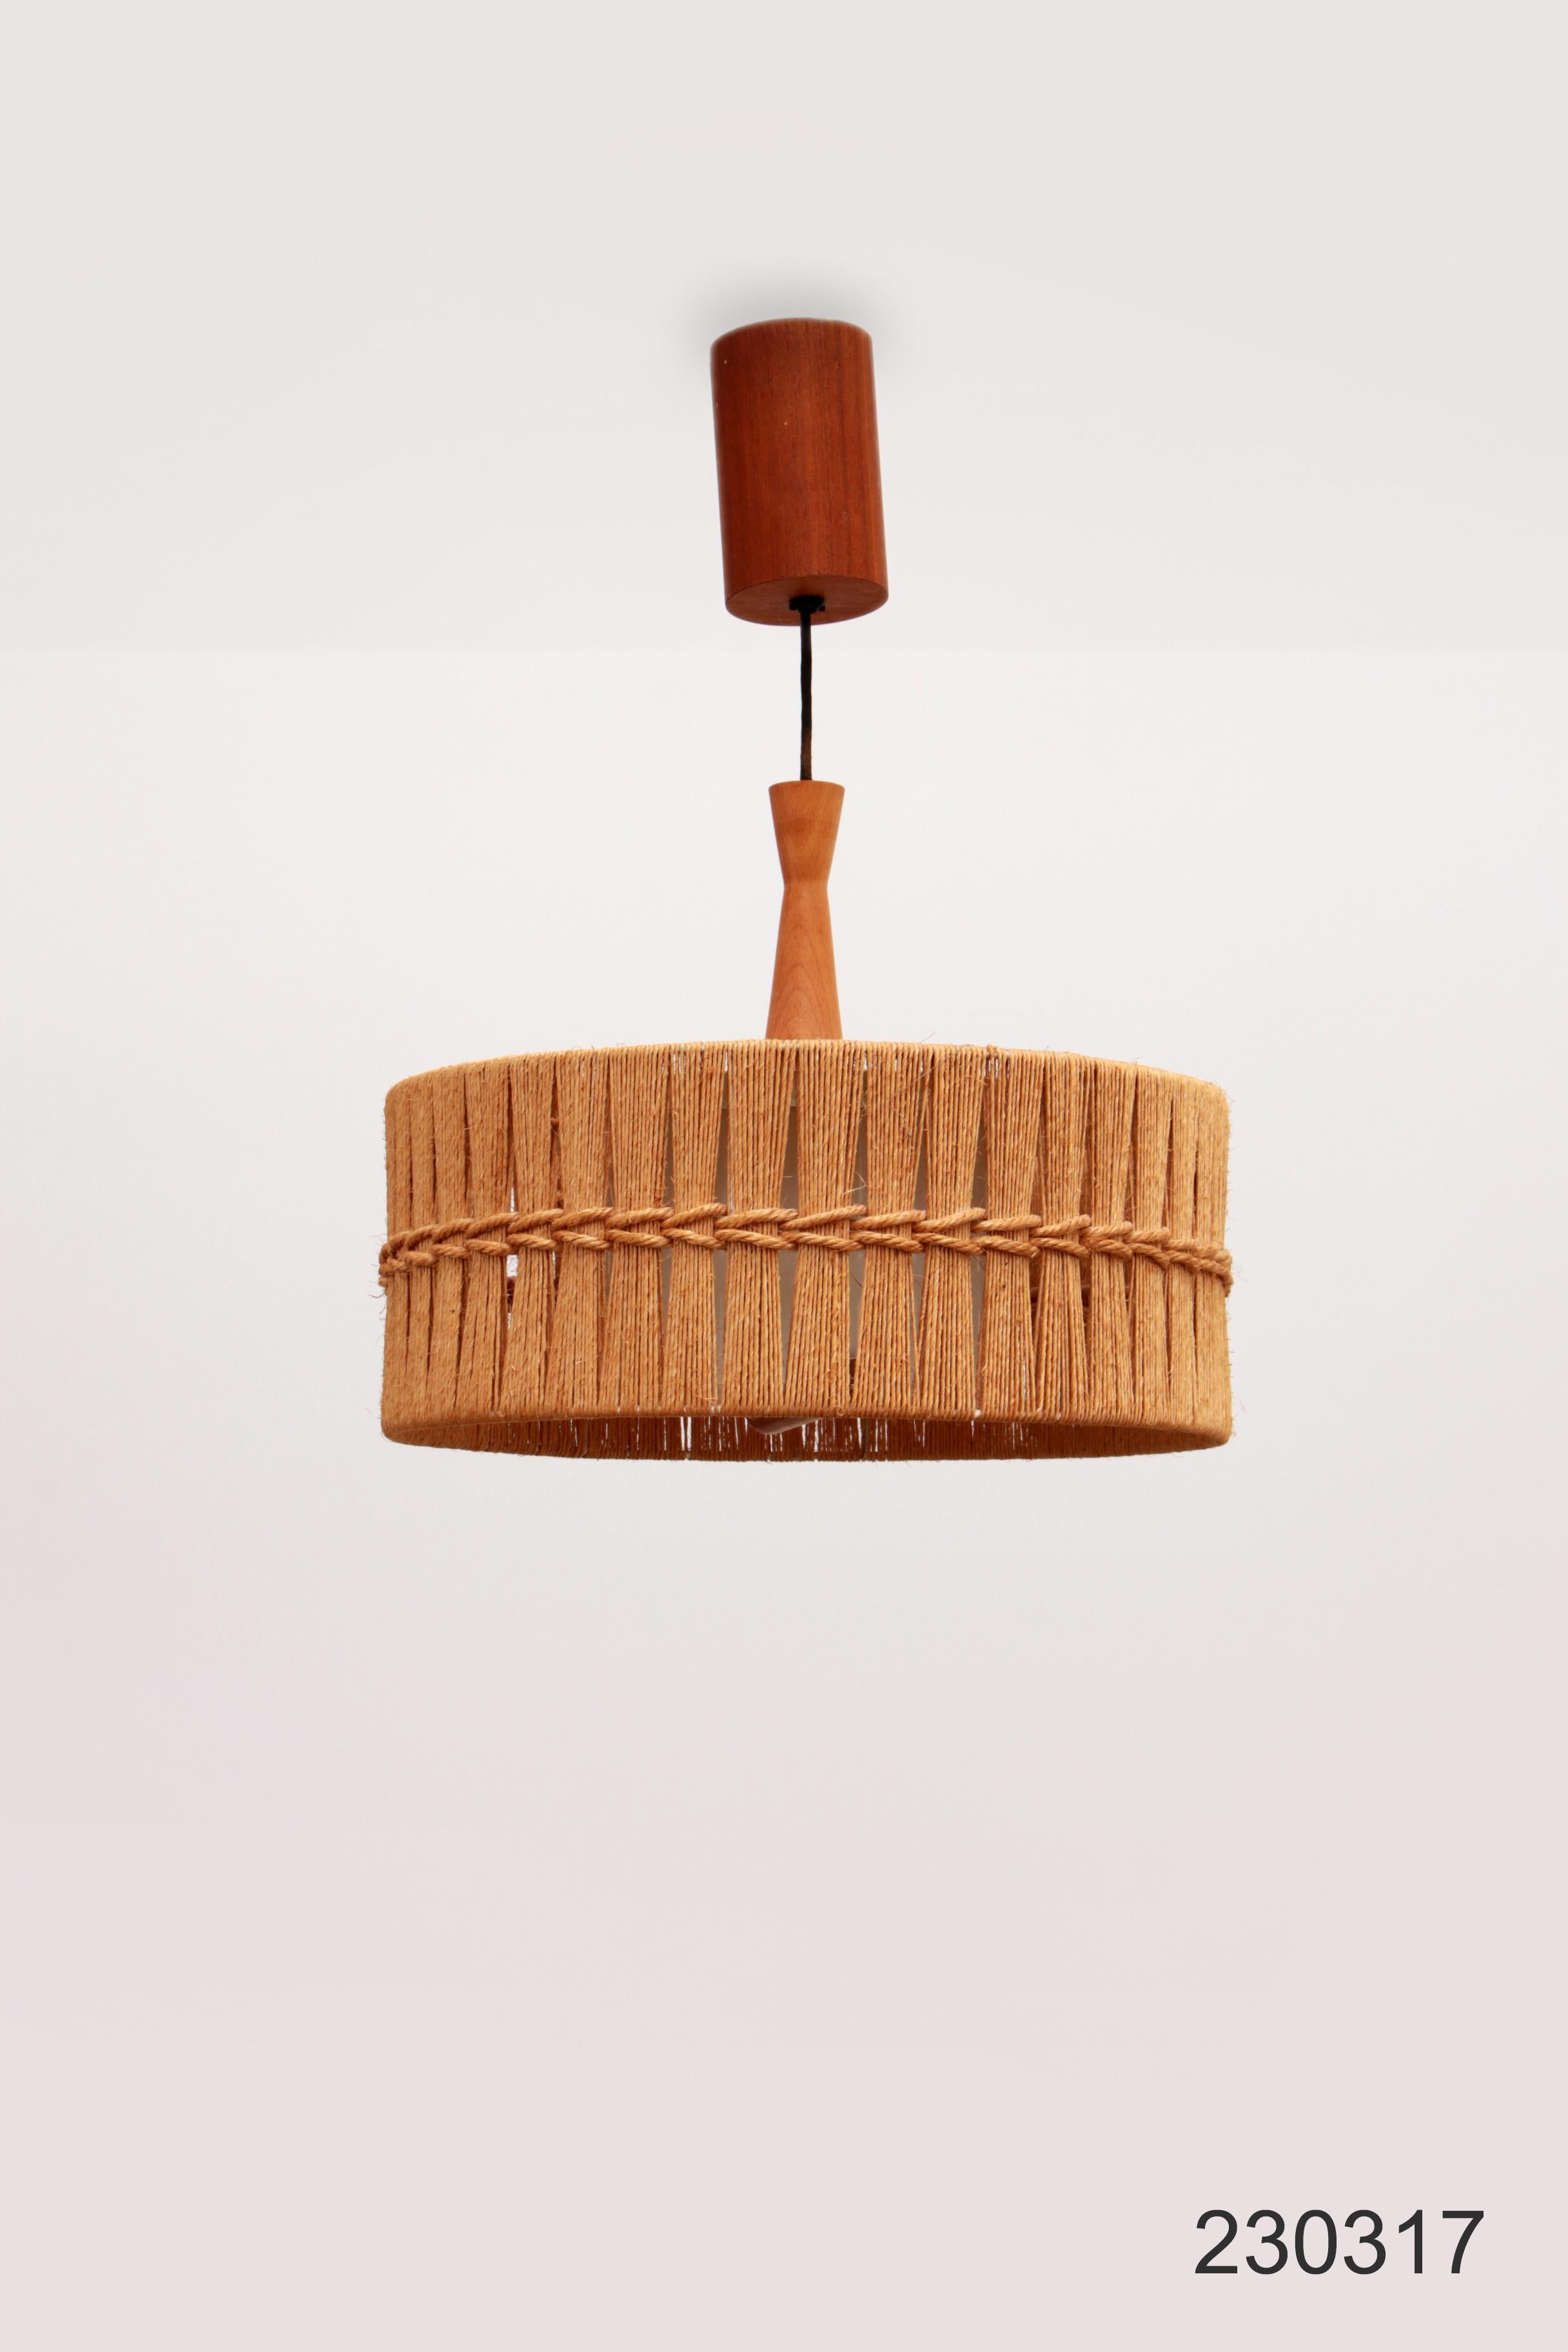 Vintage Temde Hanging Lamp with Teak and Raffia 1960s Germany For Sale 11